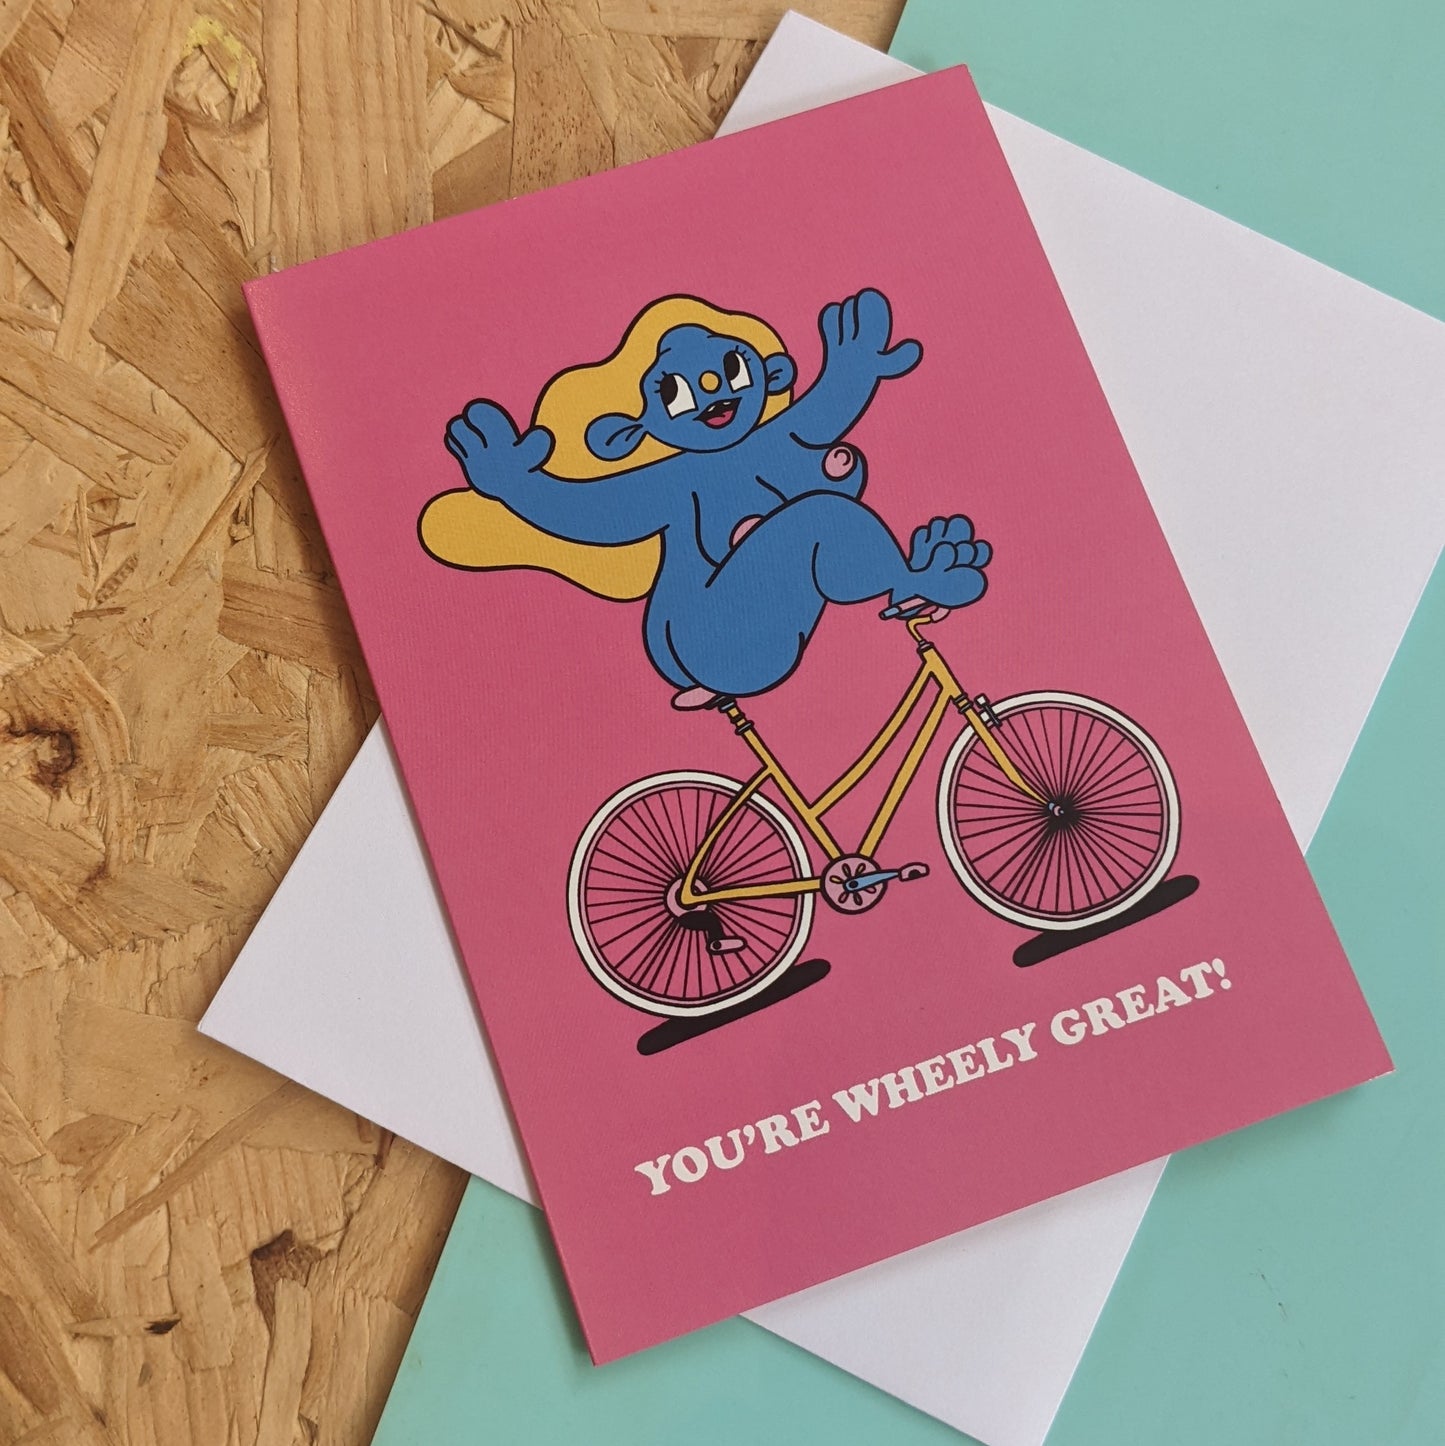 You're wheely great card